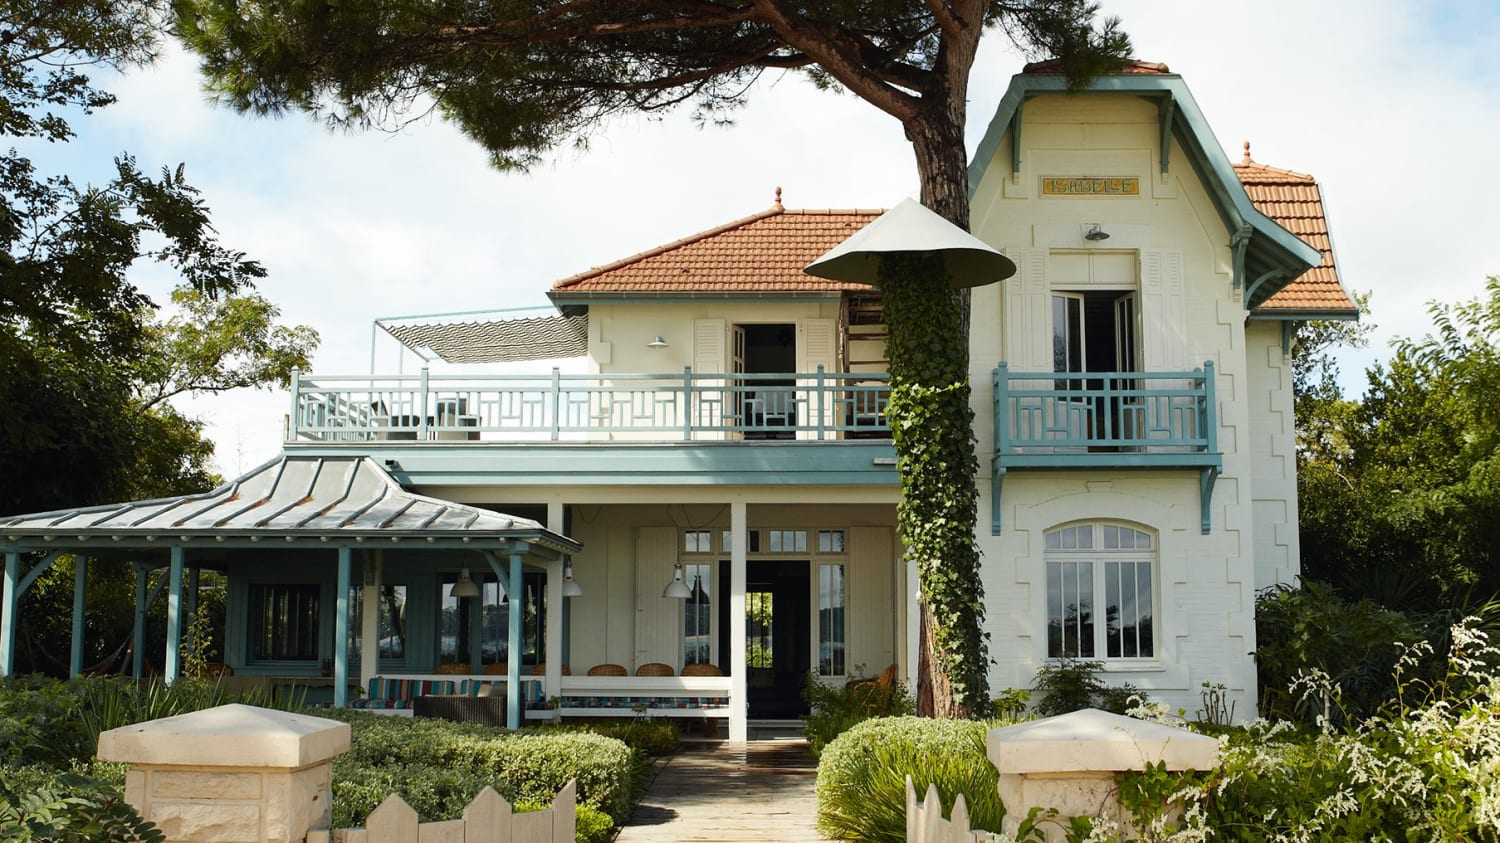 A dream seaside house on Cap Ferret revived